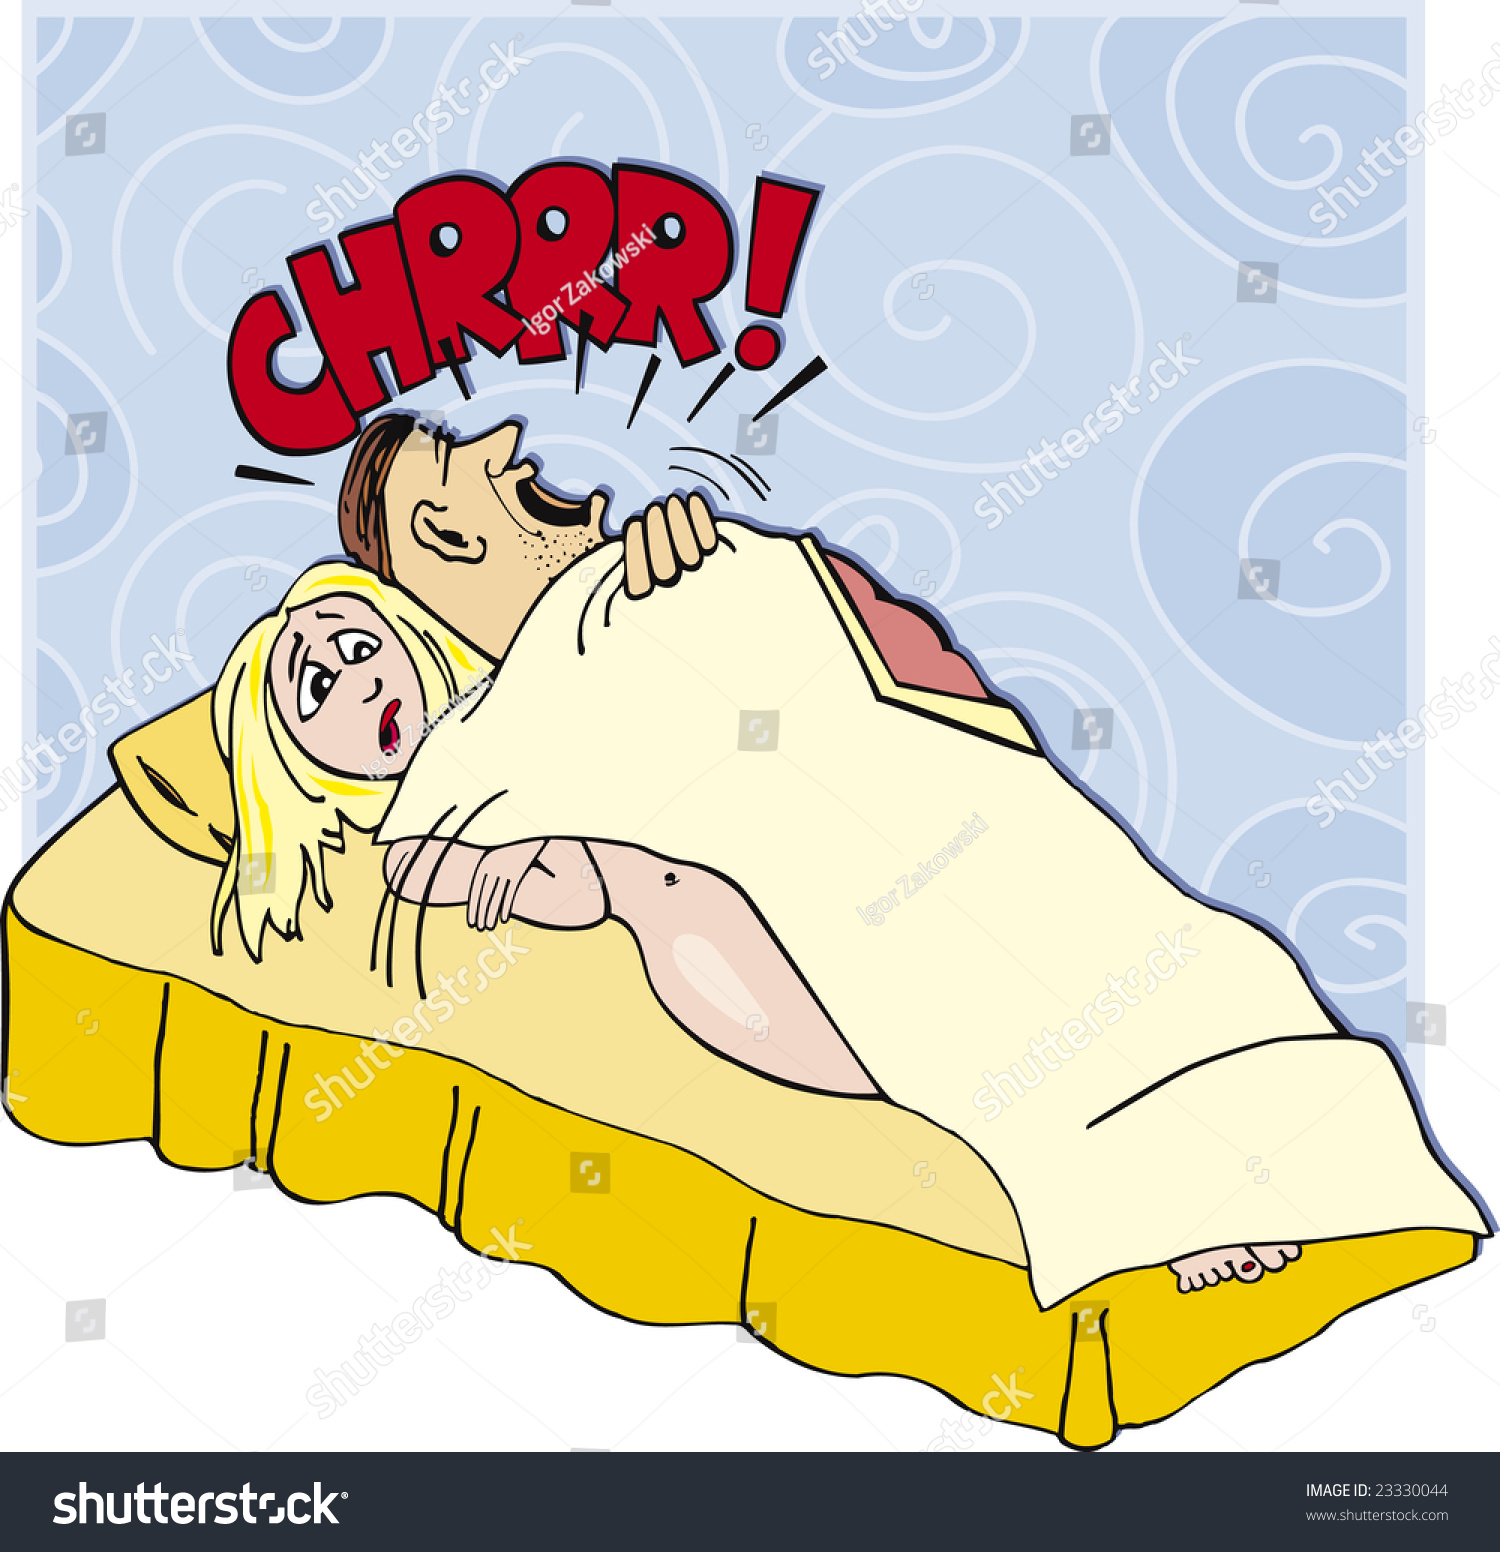 Cartoon Illustration Of Snoring Man And Disgusted Woman In Bed 23330044 Shutterstock